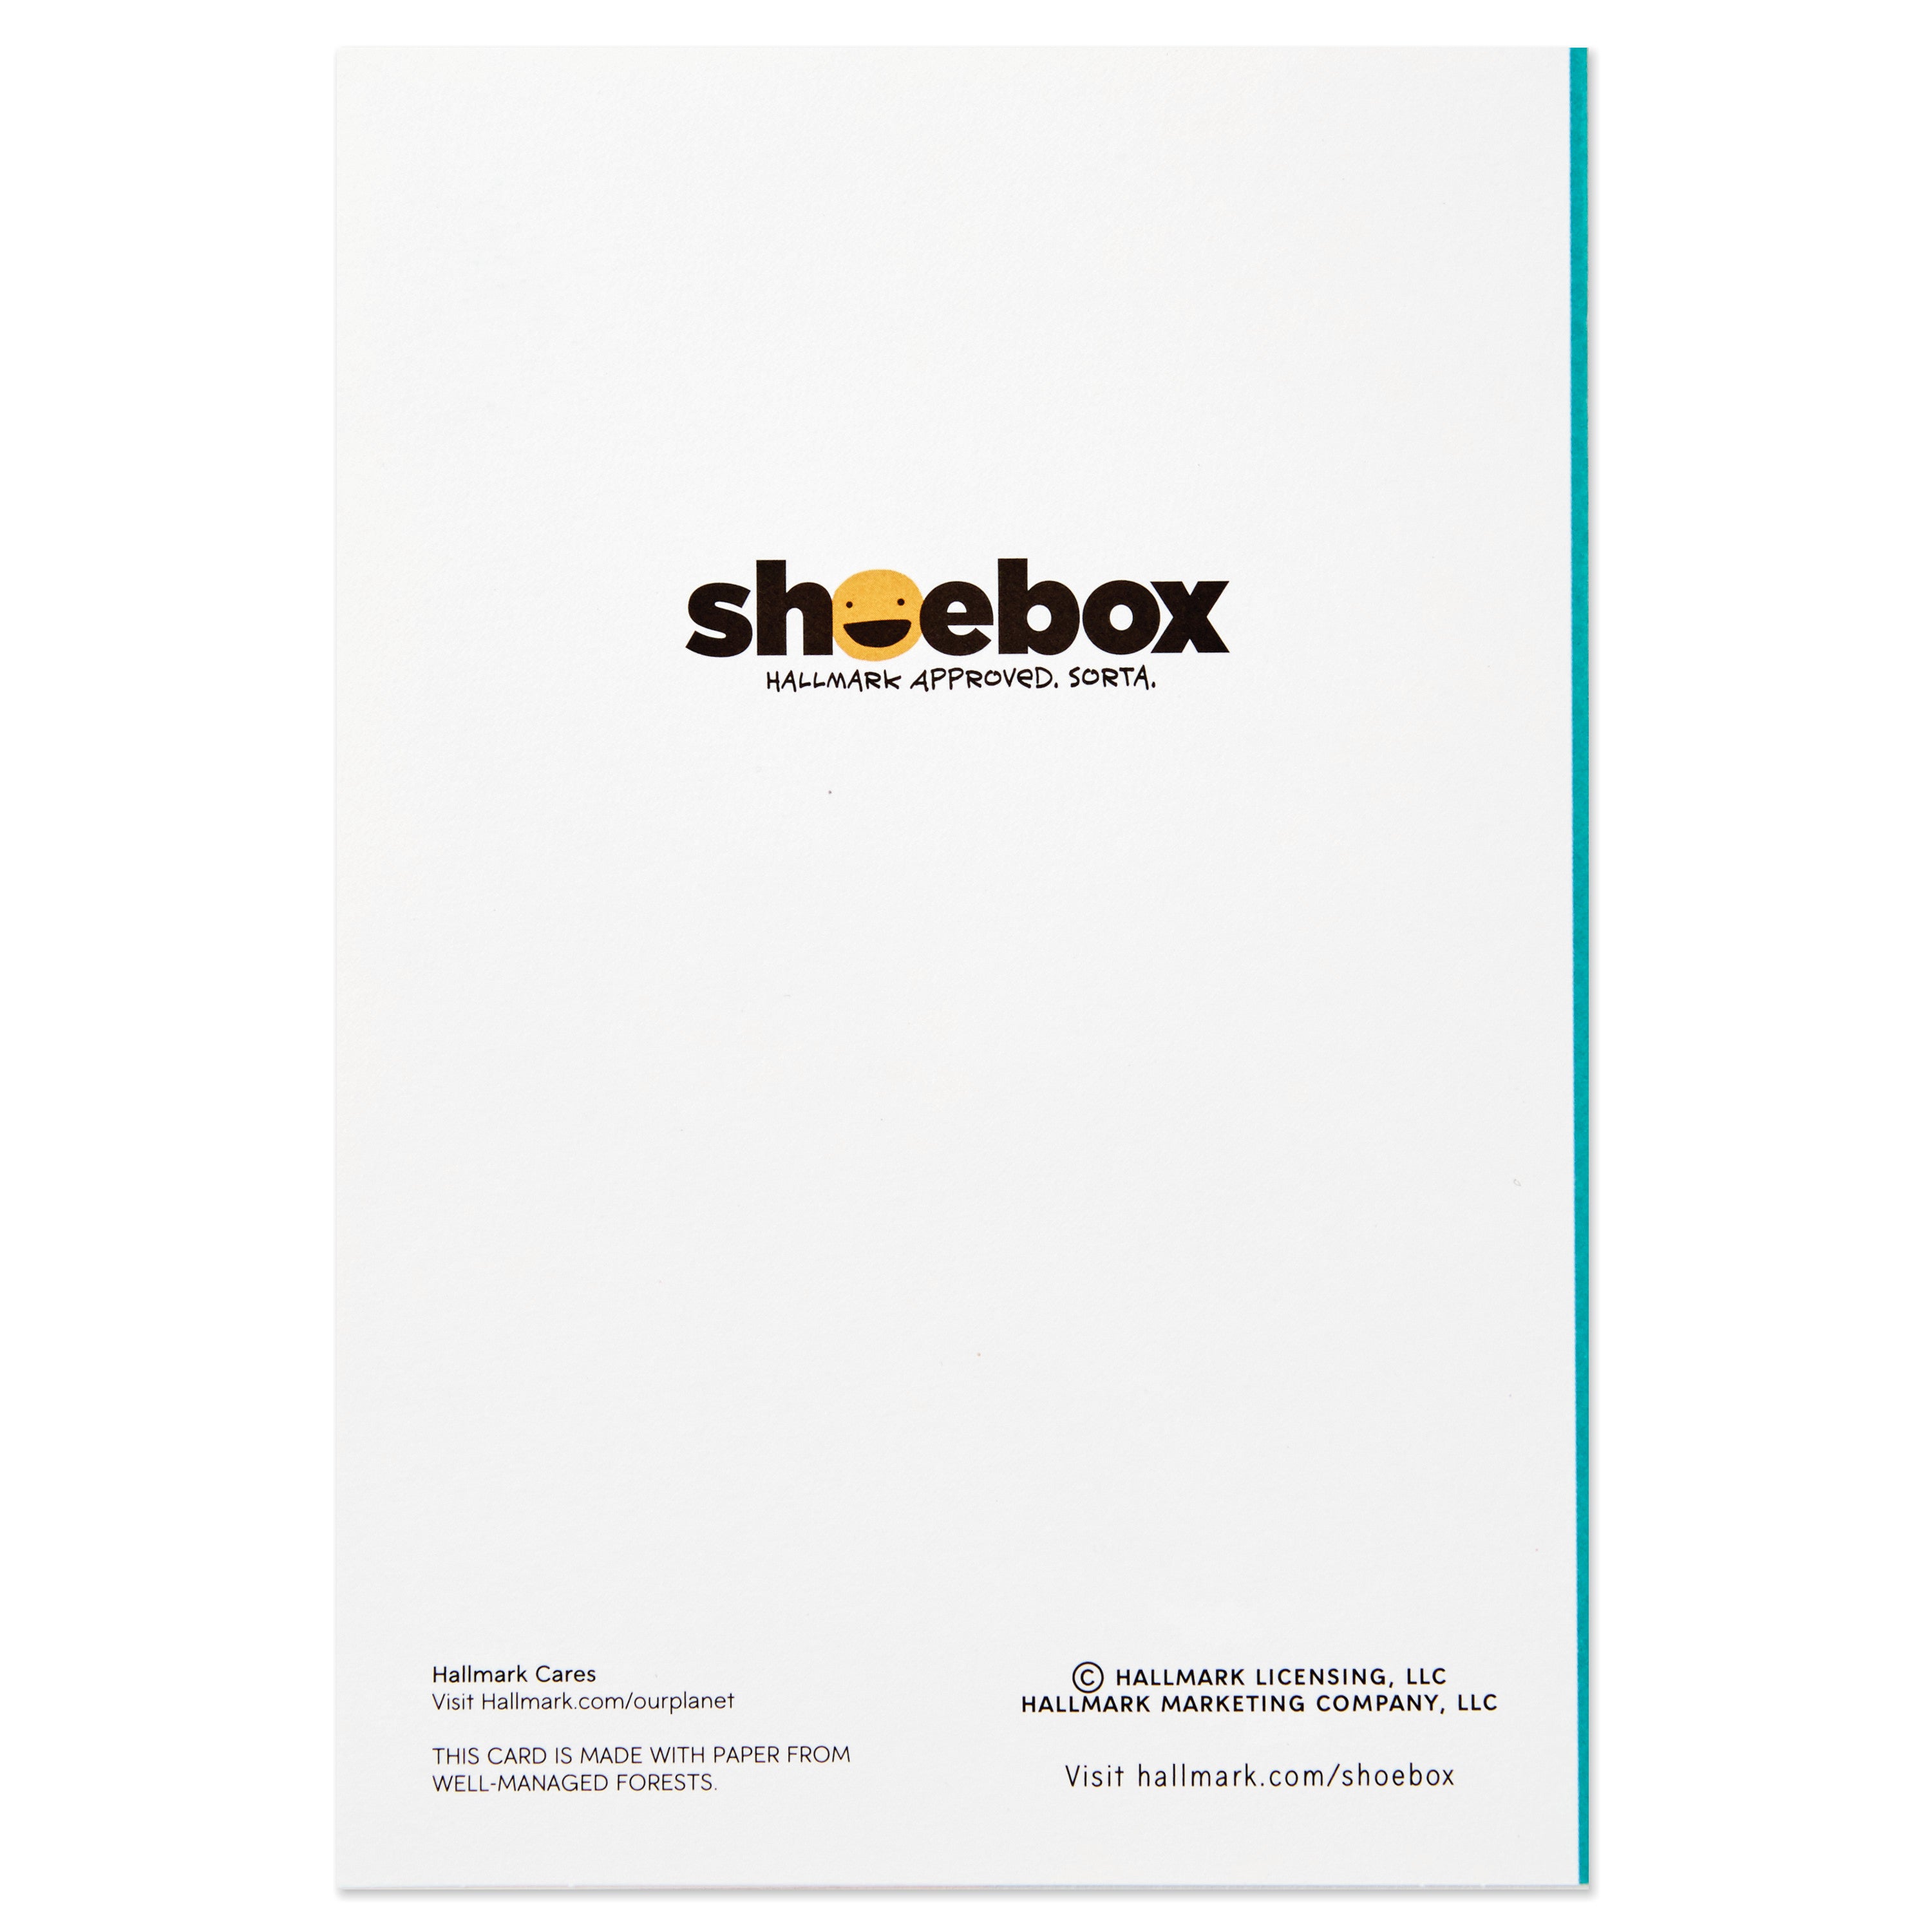 Shoebox Cancer Support Card Assortment (6 Cards with Envelopes)